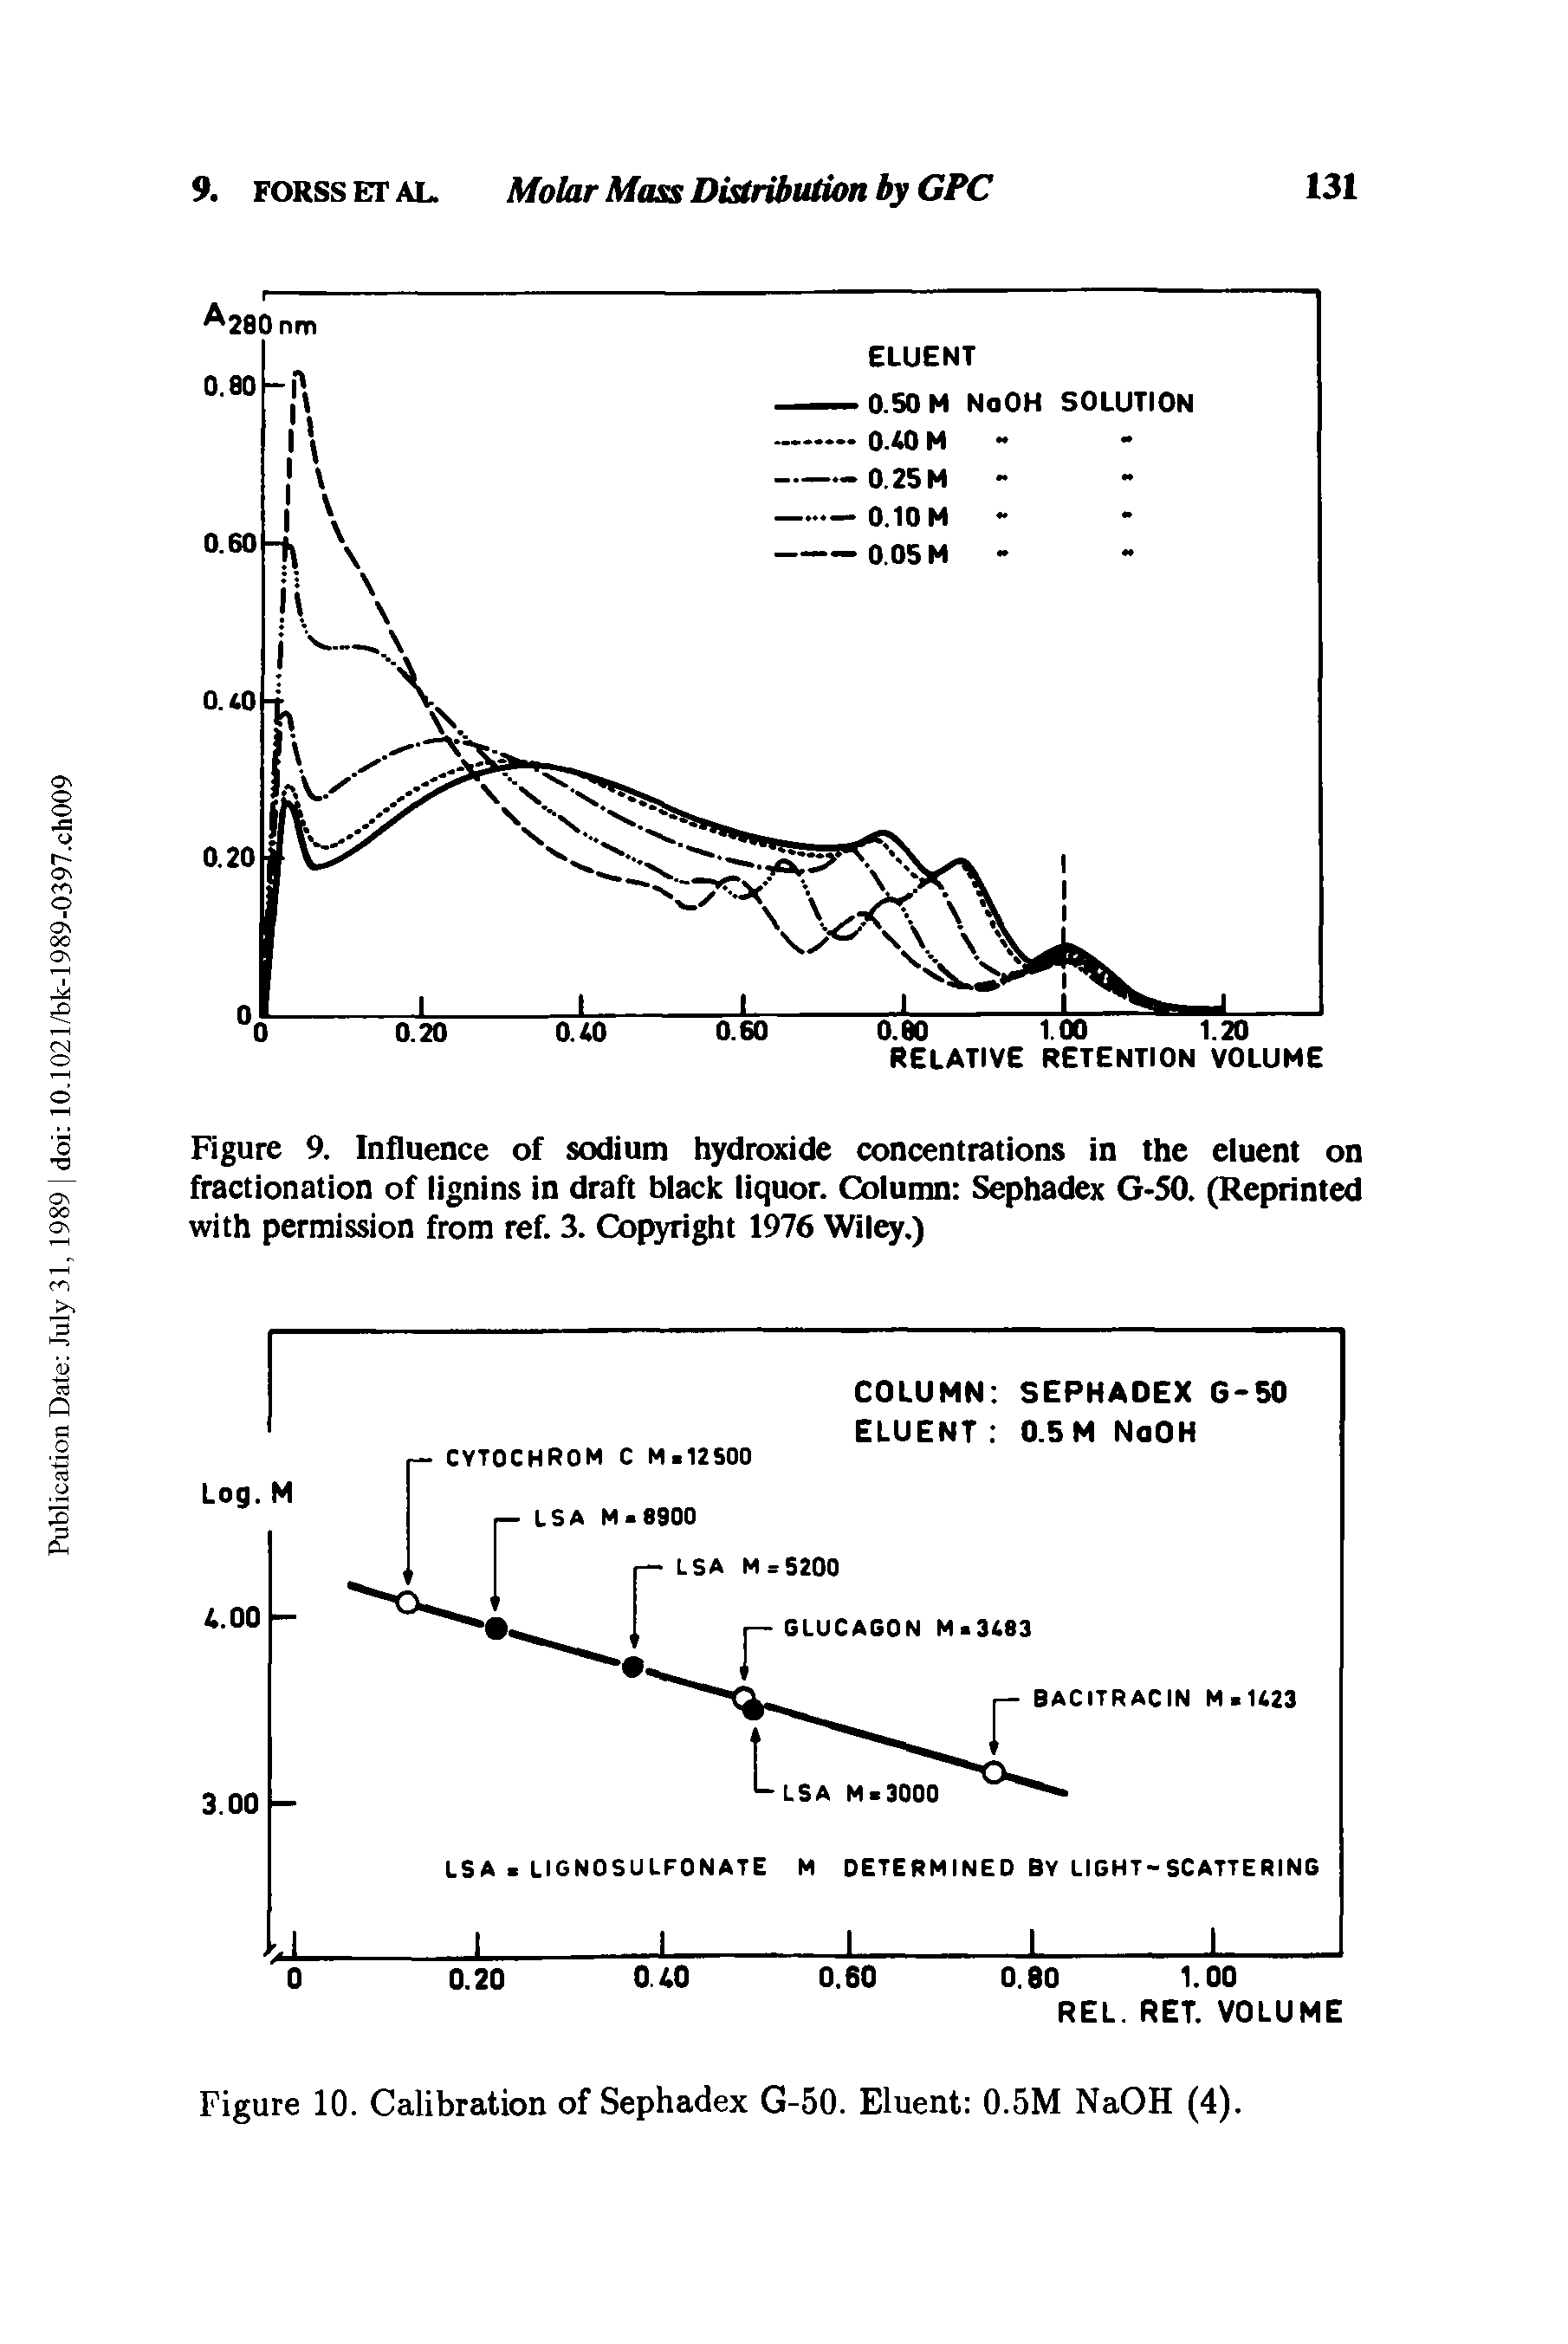 Figure 9. Influence of sodium hydroxide concentrations in the eluent on fractionation of lignins in draft black liquor. Column Sephadex G-50. (Reprinted with permission from ref. 3. Copyright 1976 Wiley.)...